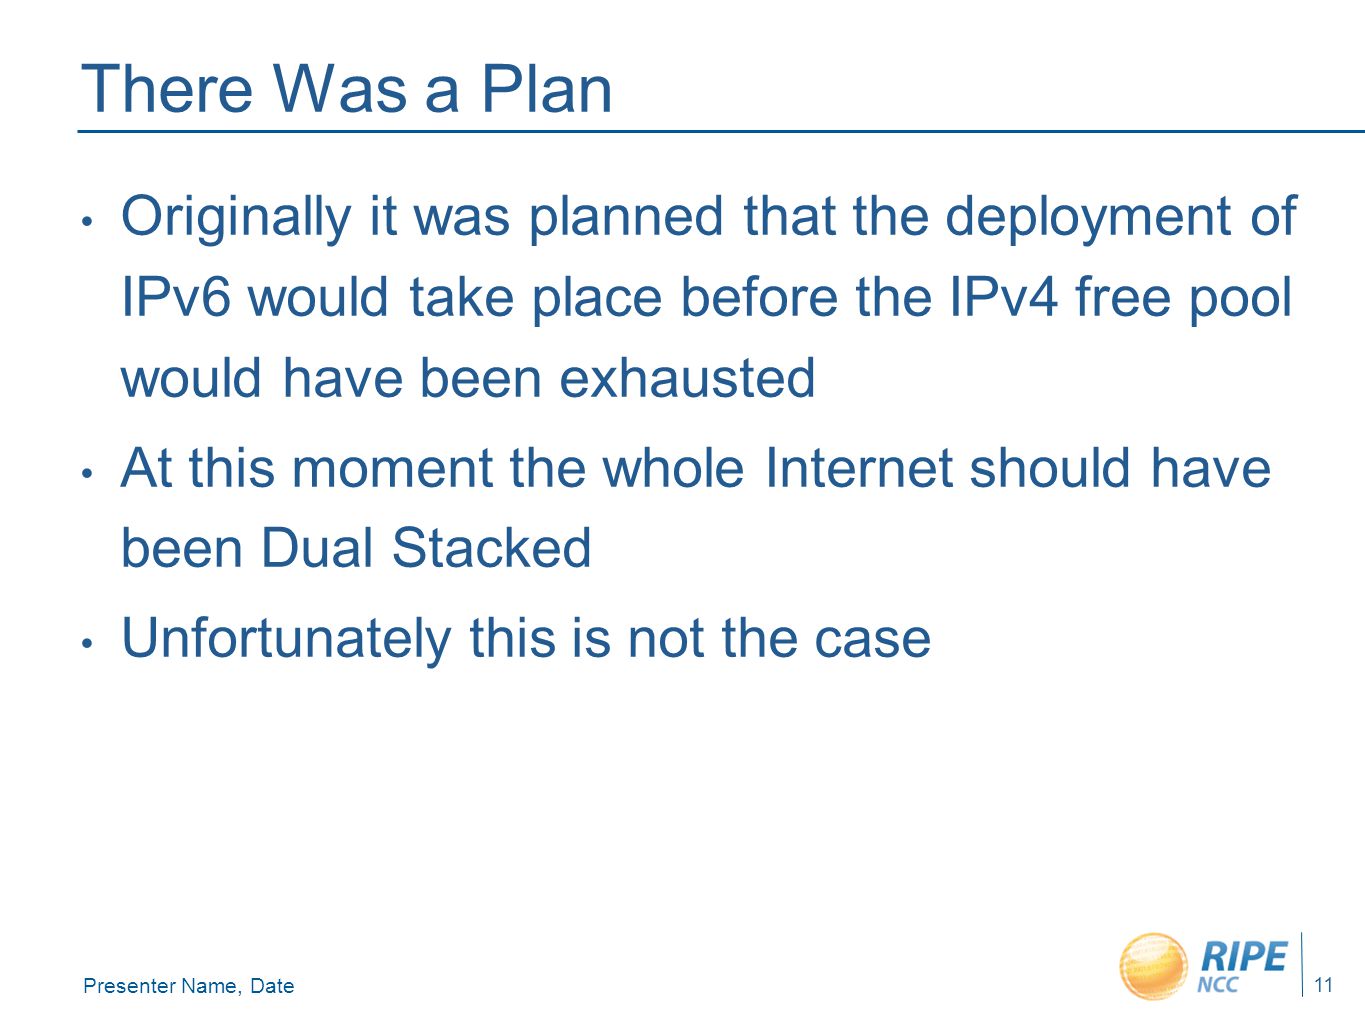 Presenter Name, Date 11 There Was a Plan Originally it was planned that the deployment of IPv6 would take place before the IPv4 free pool would have been exhausted At this moment the whole Internet should have been Dual Stacked Unfortunately this is not the case